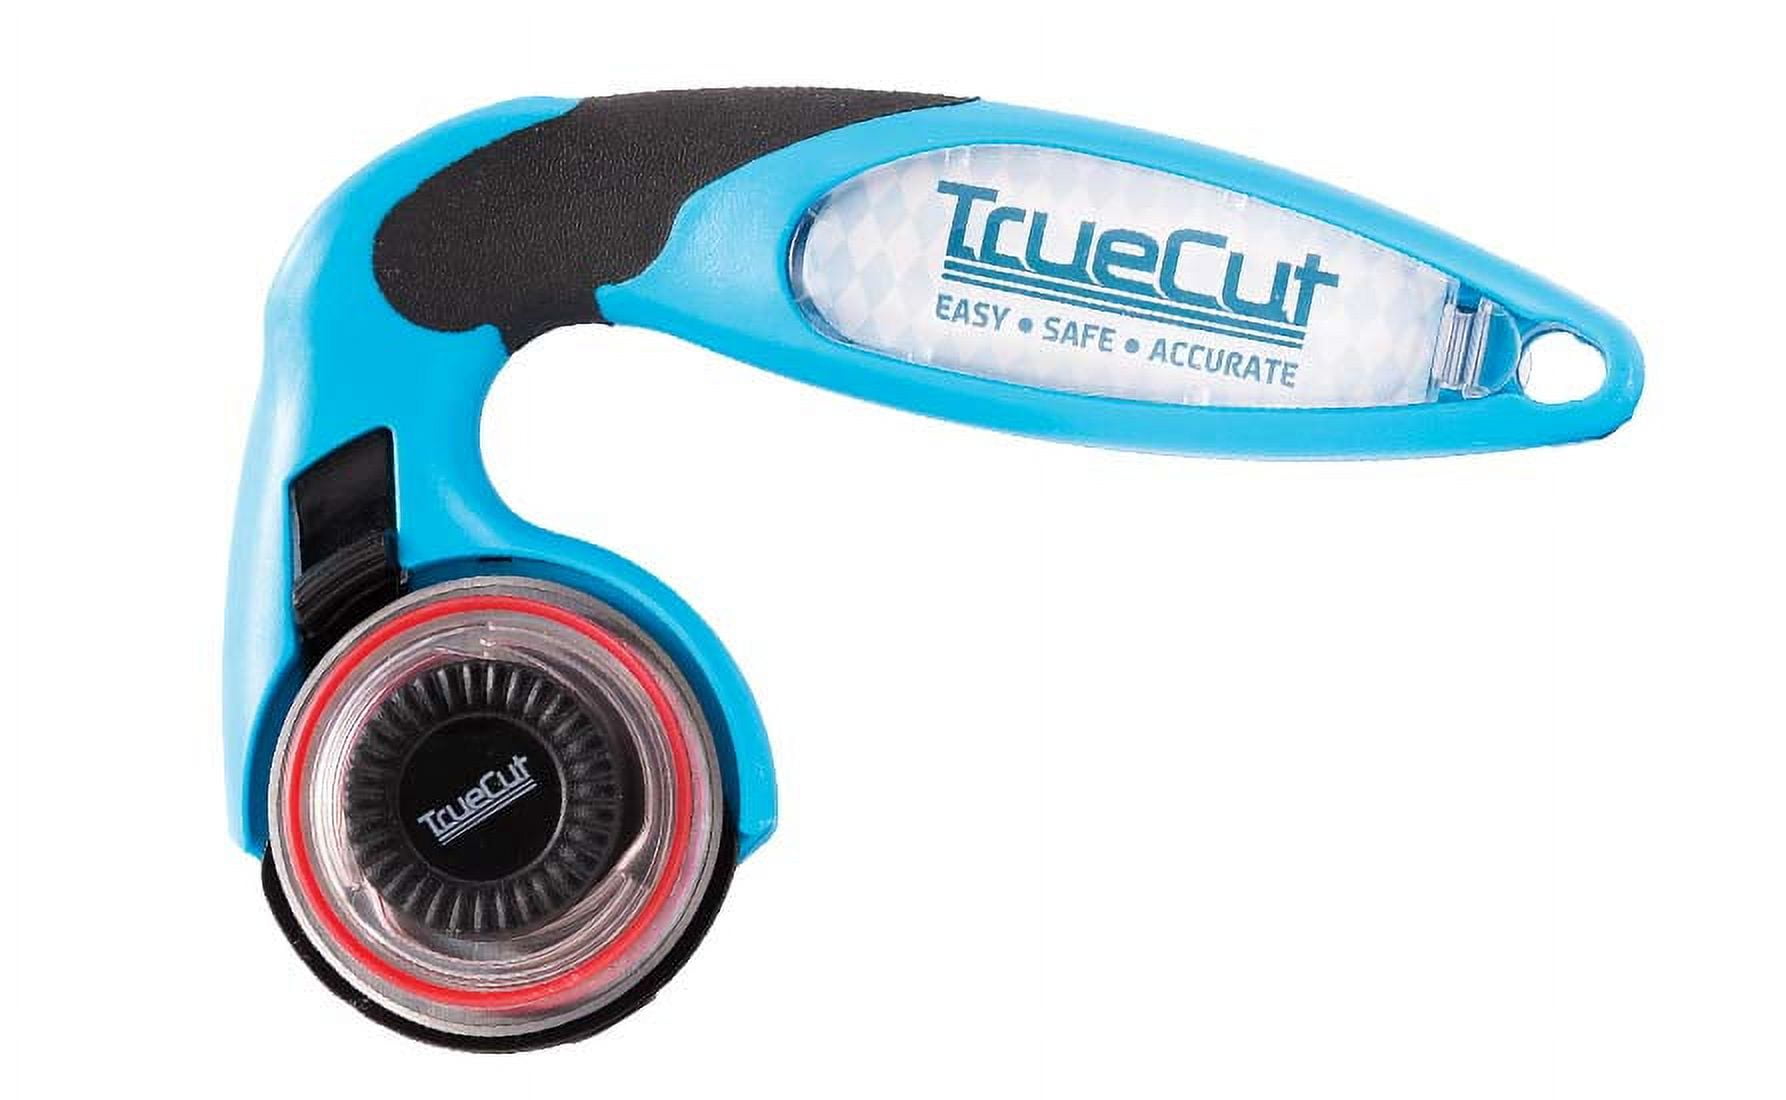 TrueCut My Comfort Rotary Cutter - 45mm Ergonomic Rotary Cutter With Track  & Guide System For TrueCut Rulers And Quick Release For Quick Blade Changes